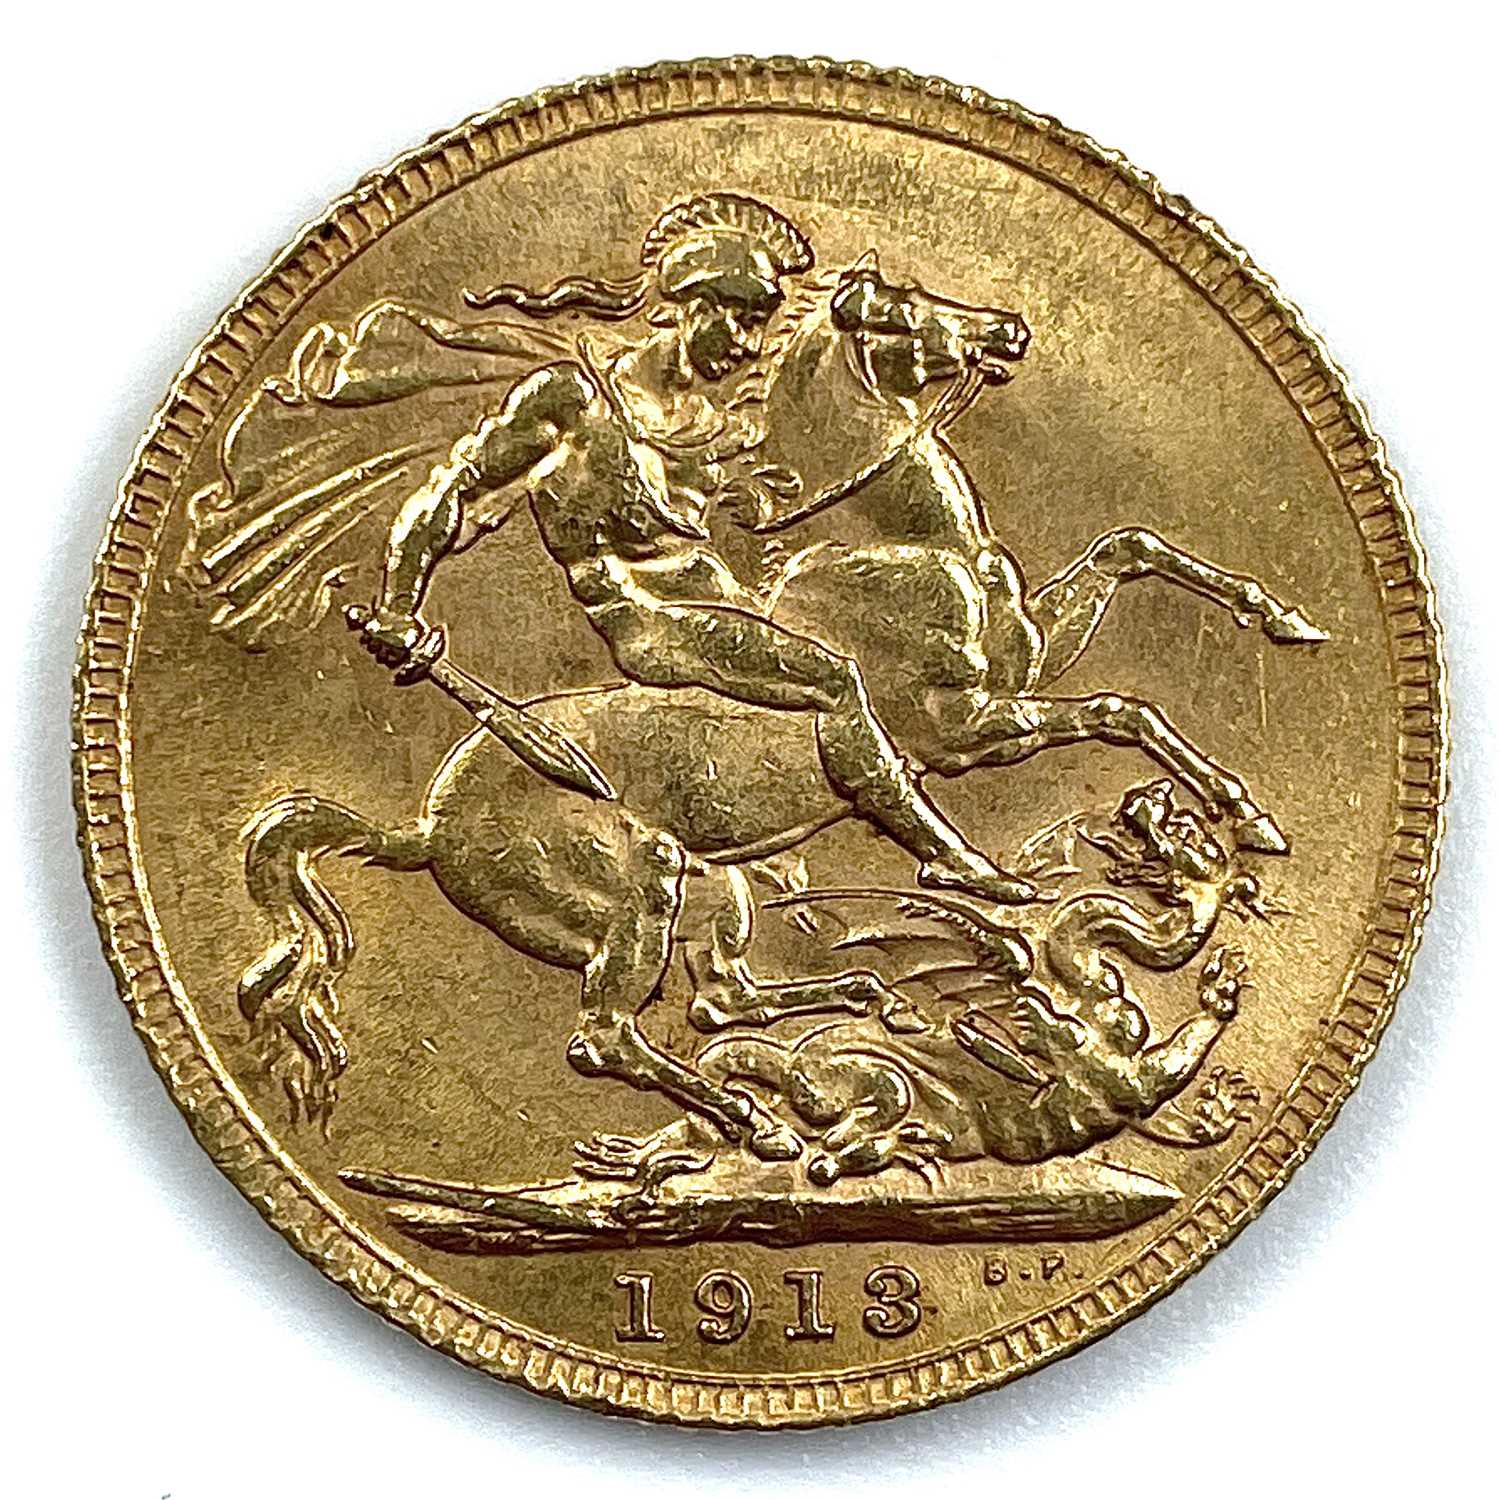 Lot 86 - A George V 1913 full sovereign gold coin.